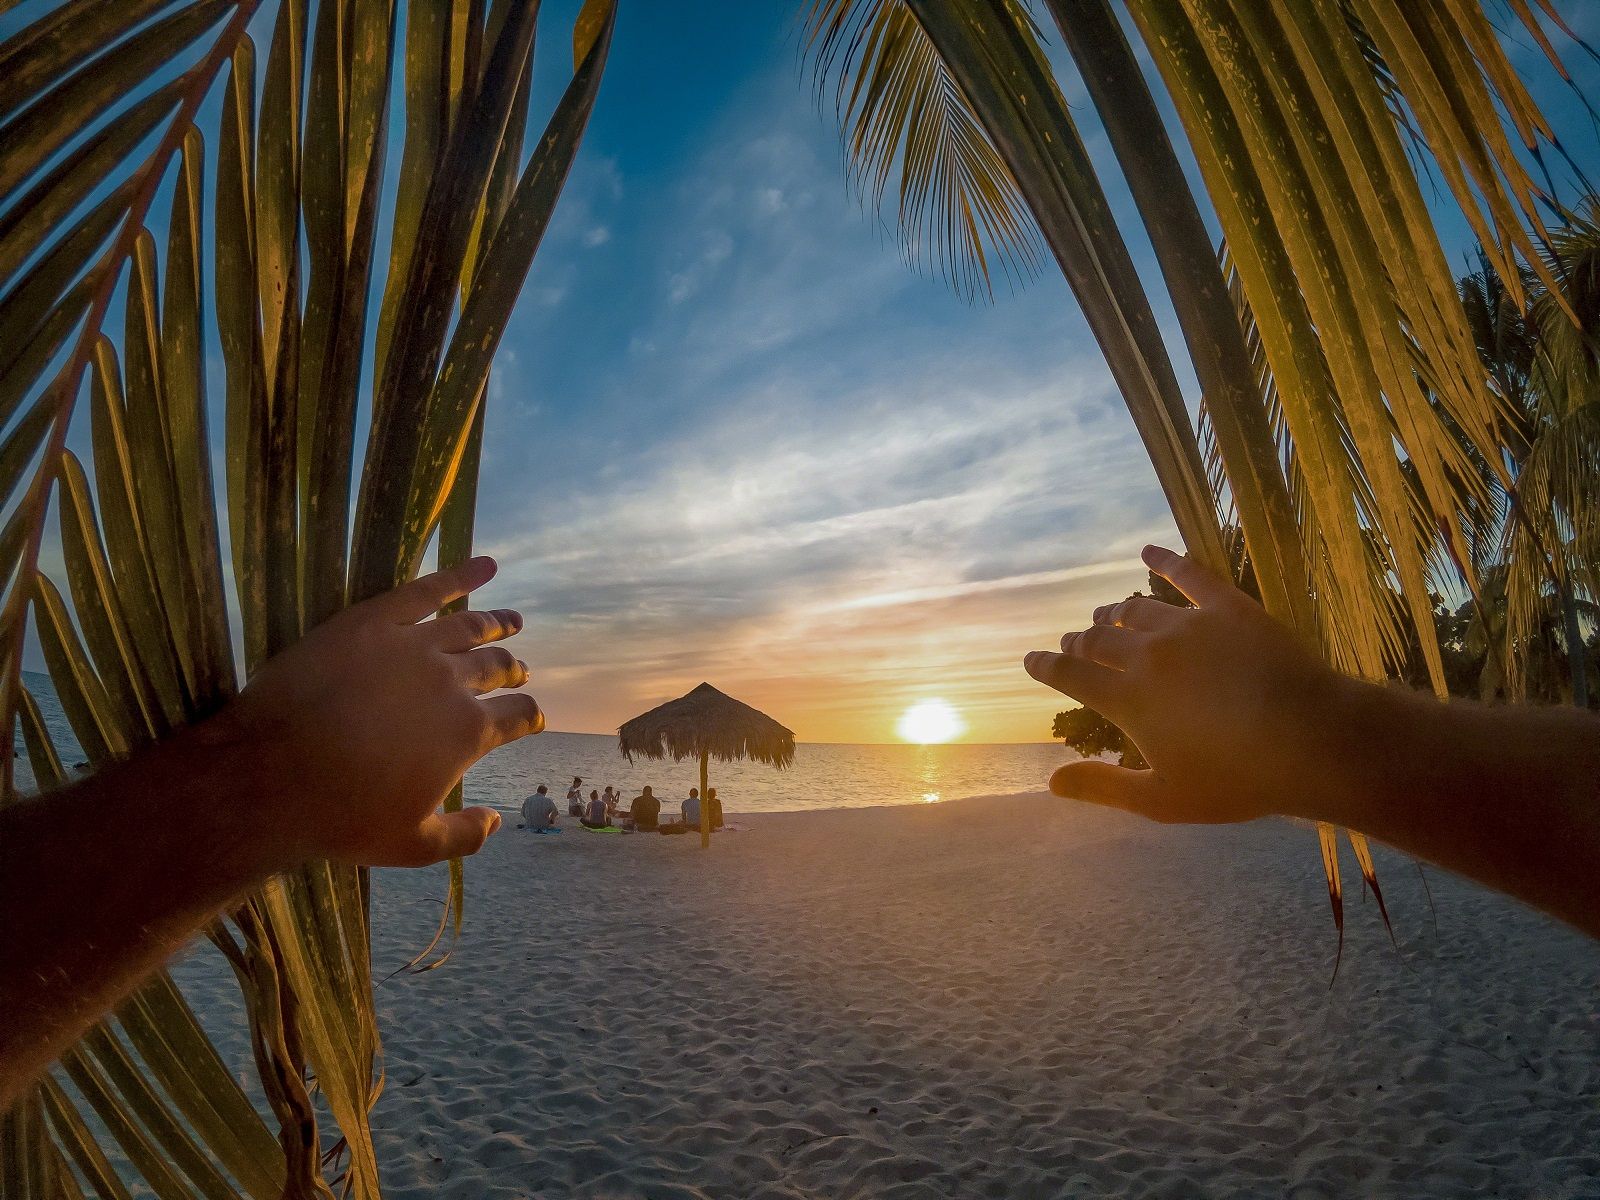 The Best Gopro Photos In The World Prepare To Lose Your Breath image 8